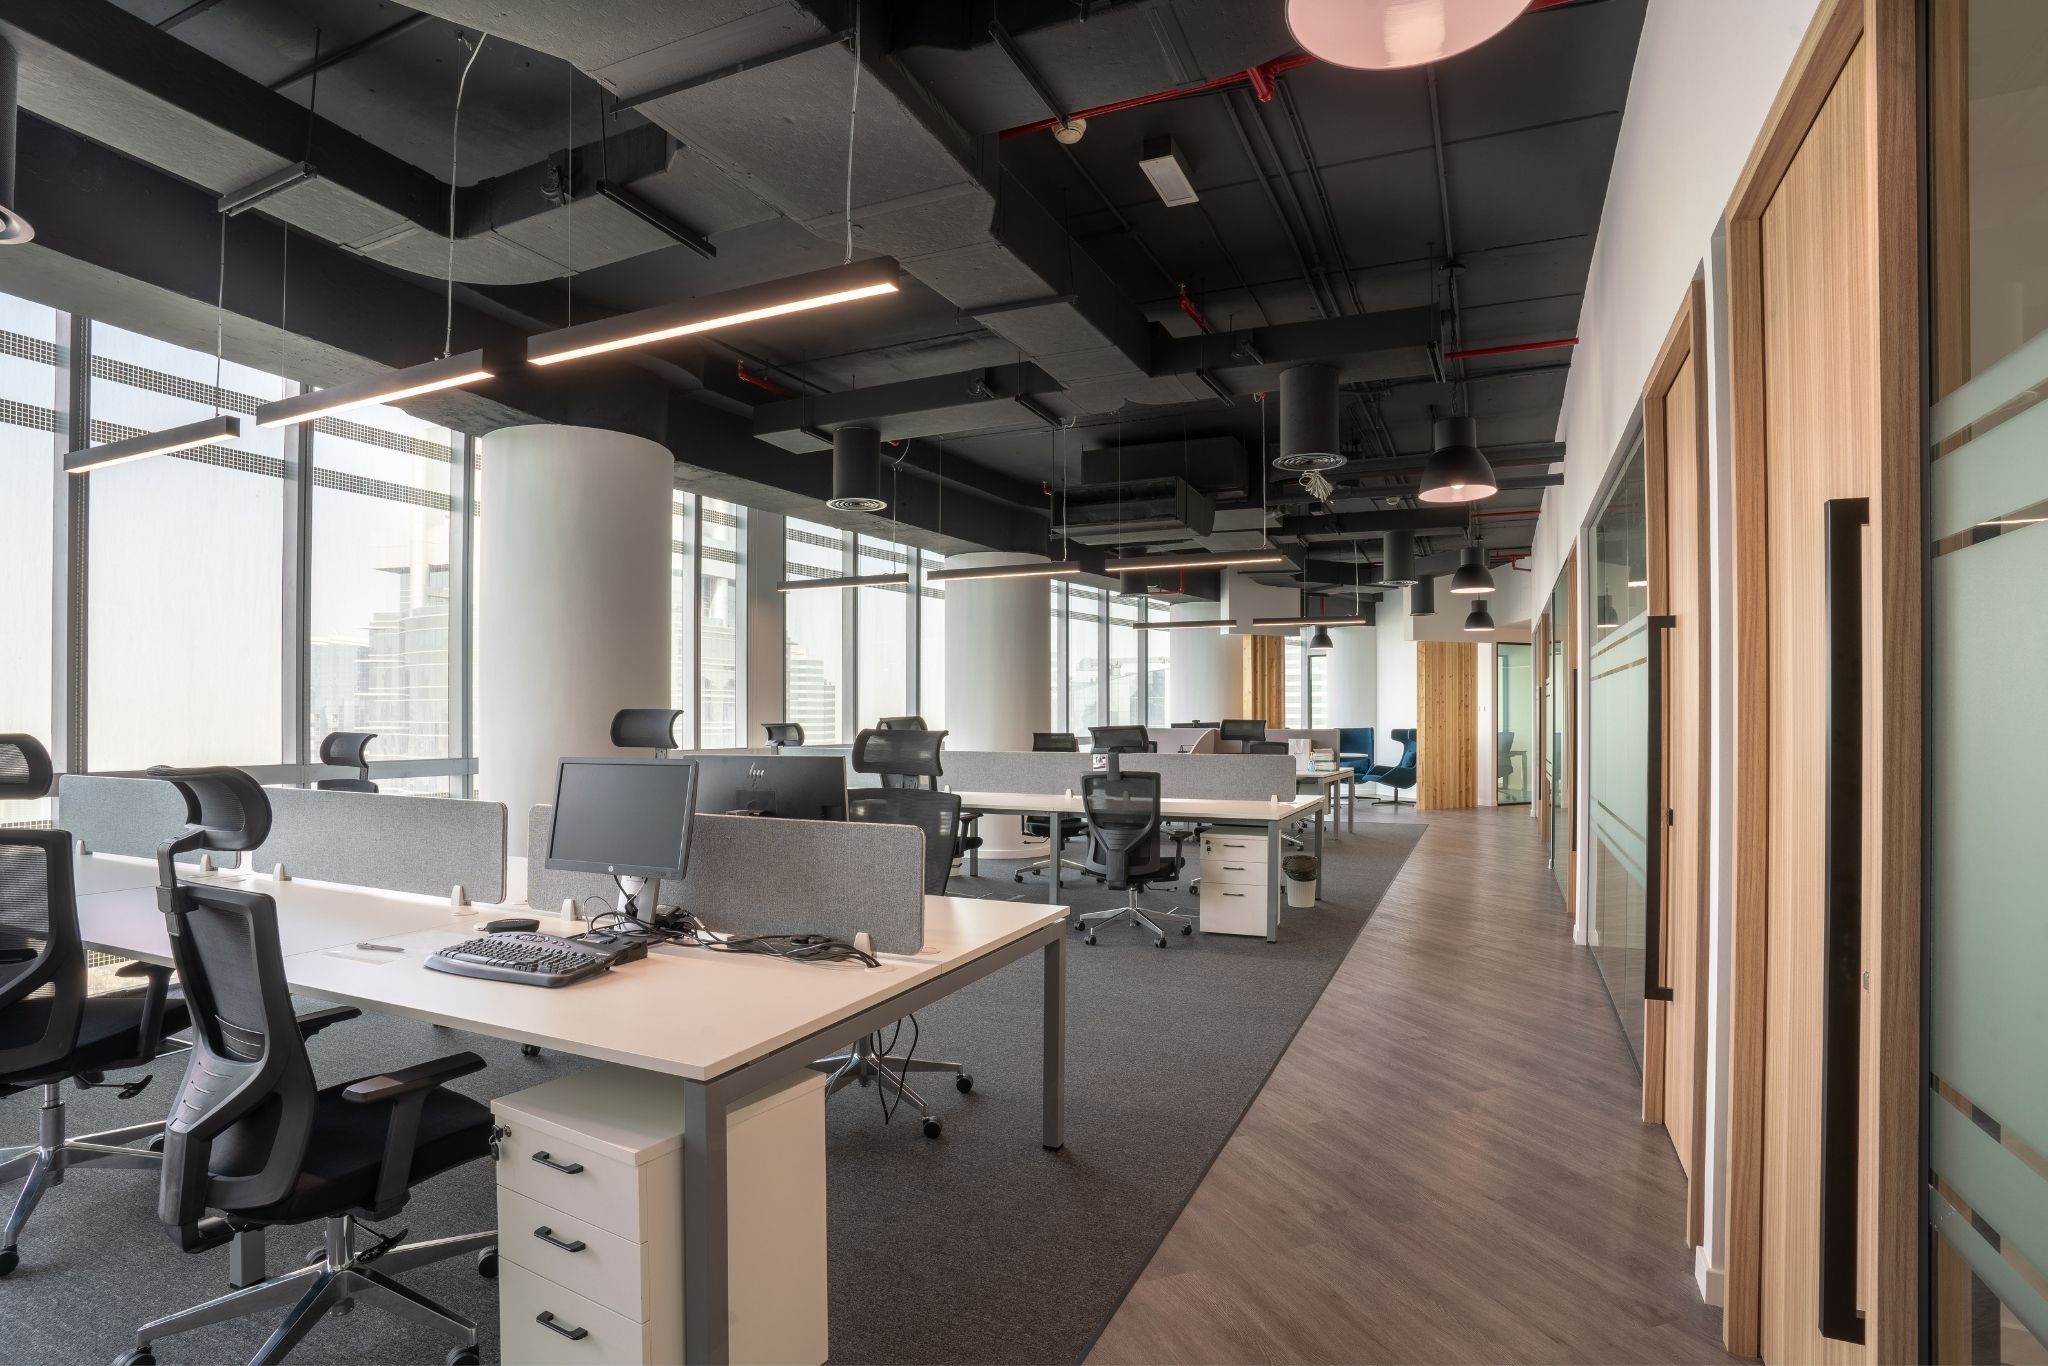 Renault regional office in Dubai design and build by Motif Interiors3